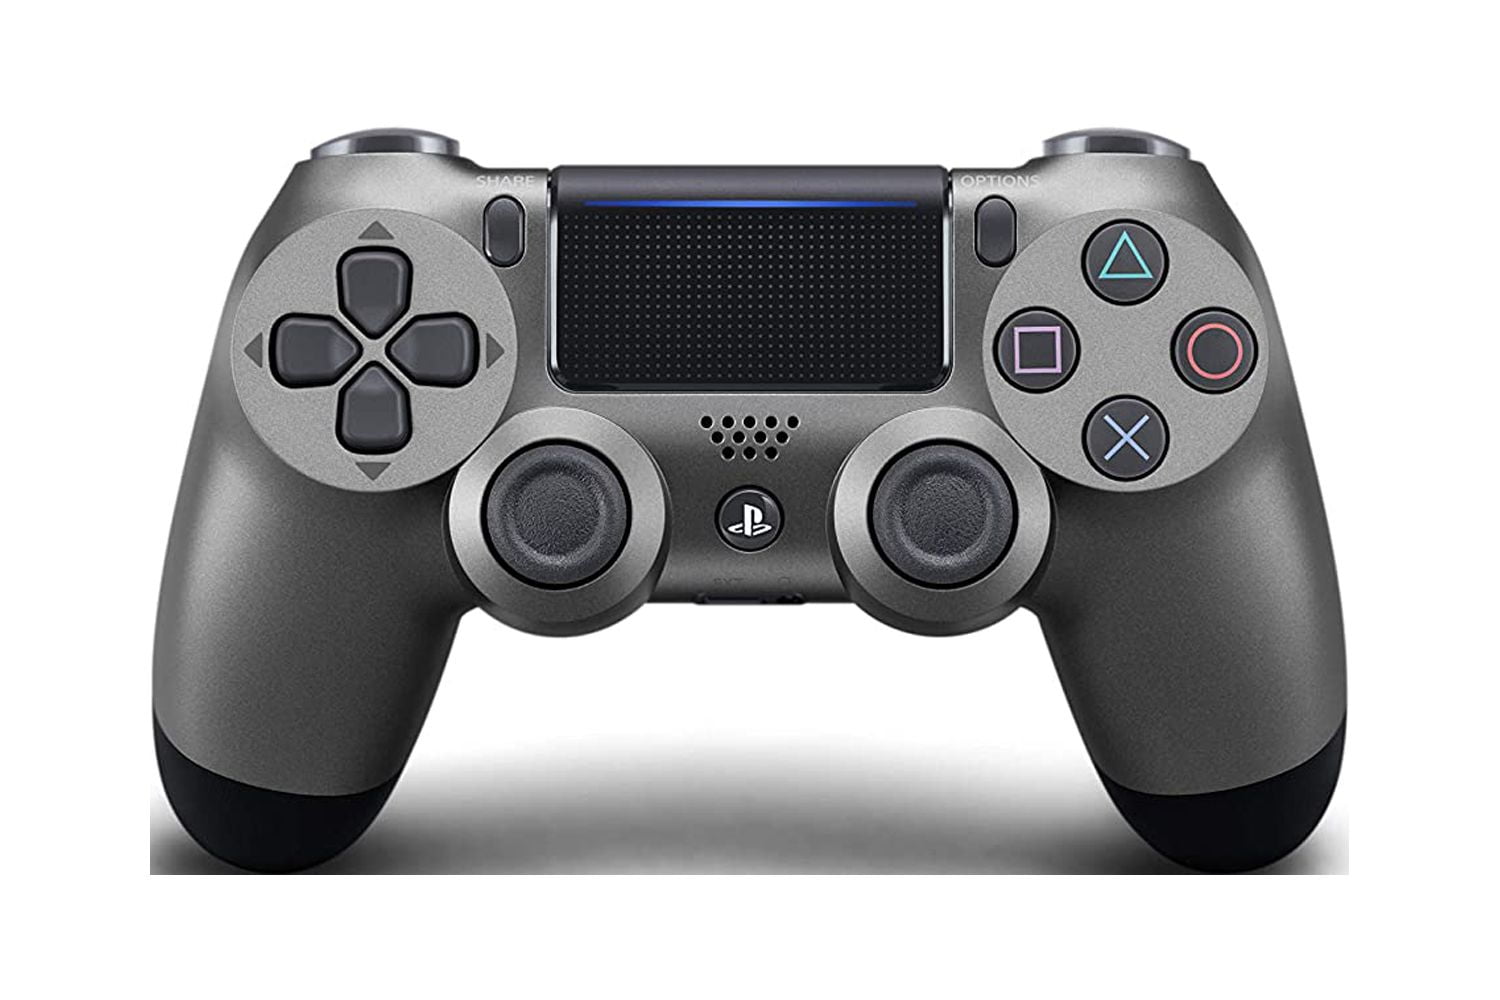 DualShock 4 Wireless Controller for PlayStation 4 - Black